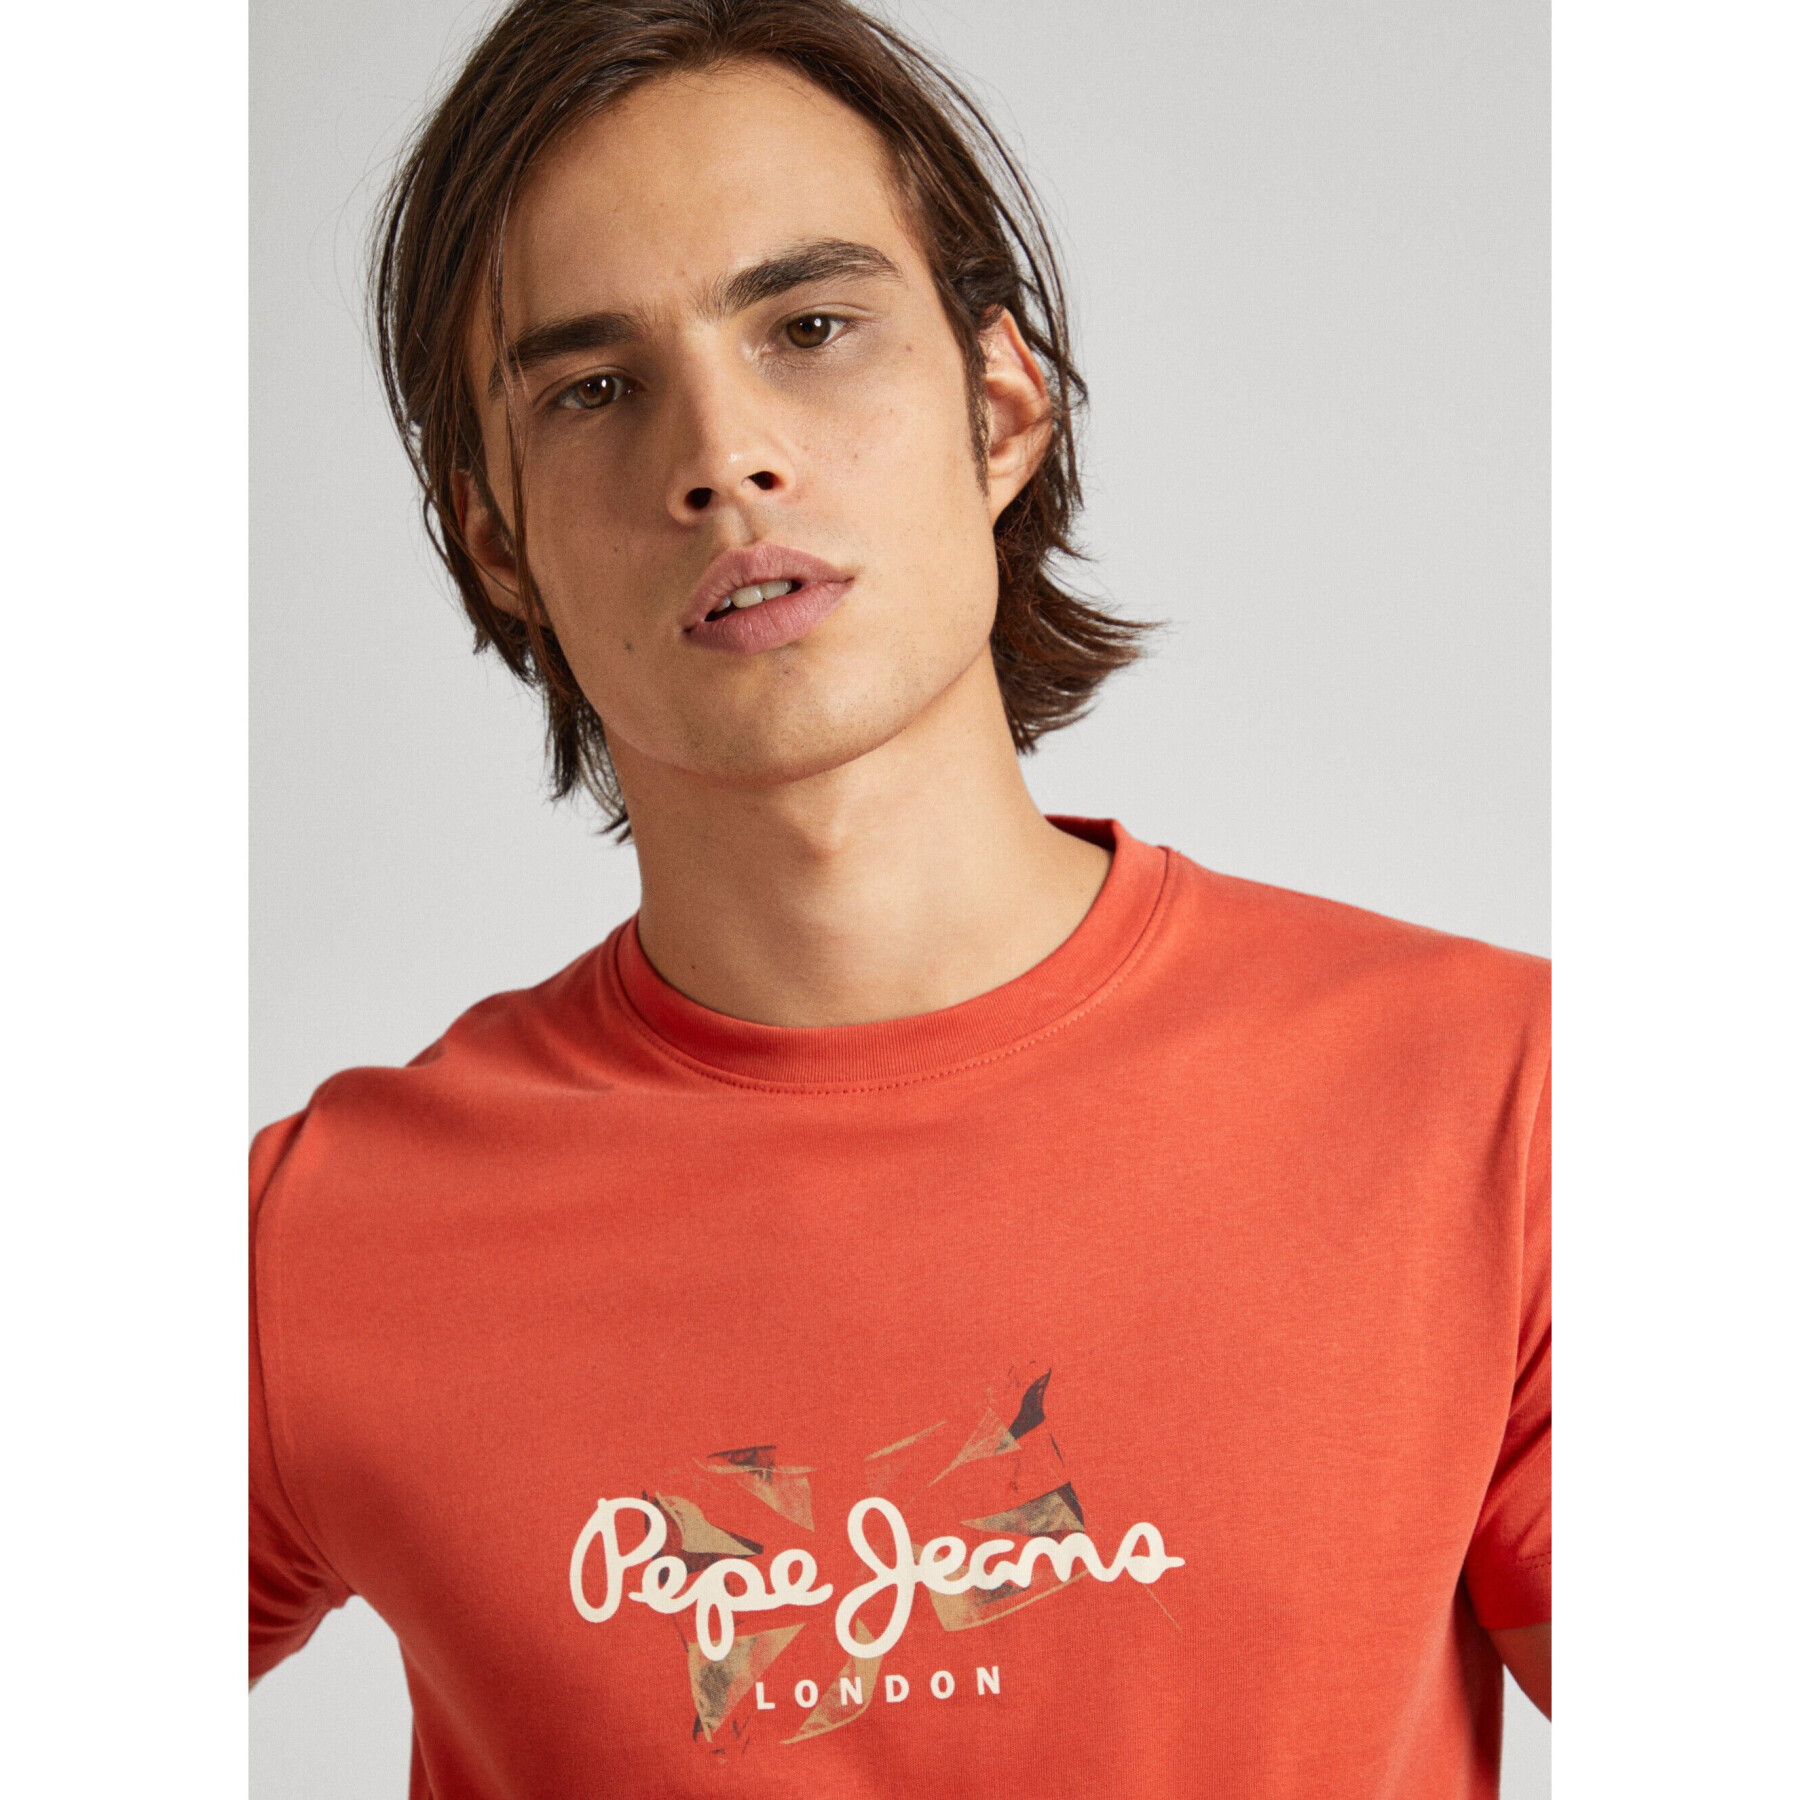 T-shirt Pepe Jeans Count